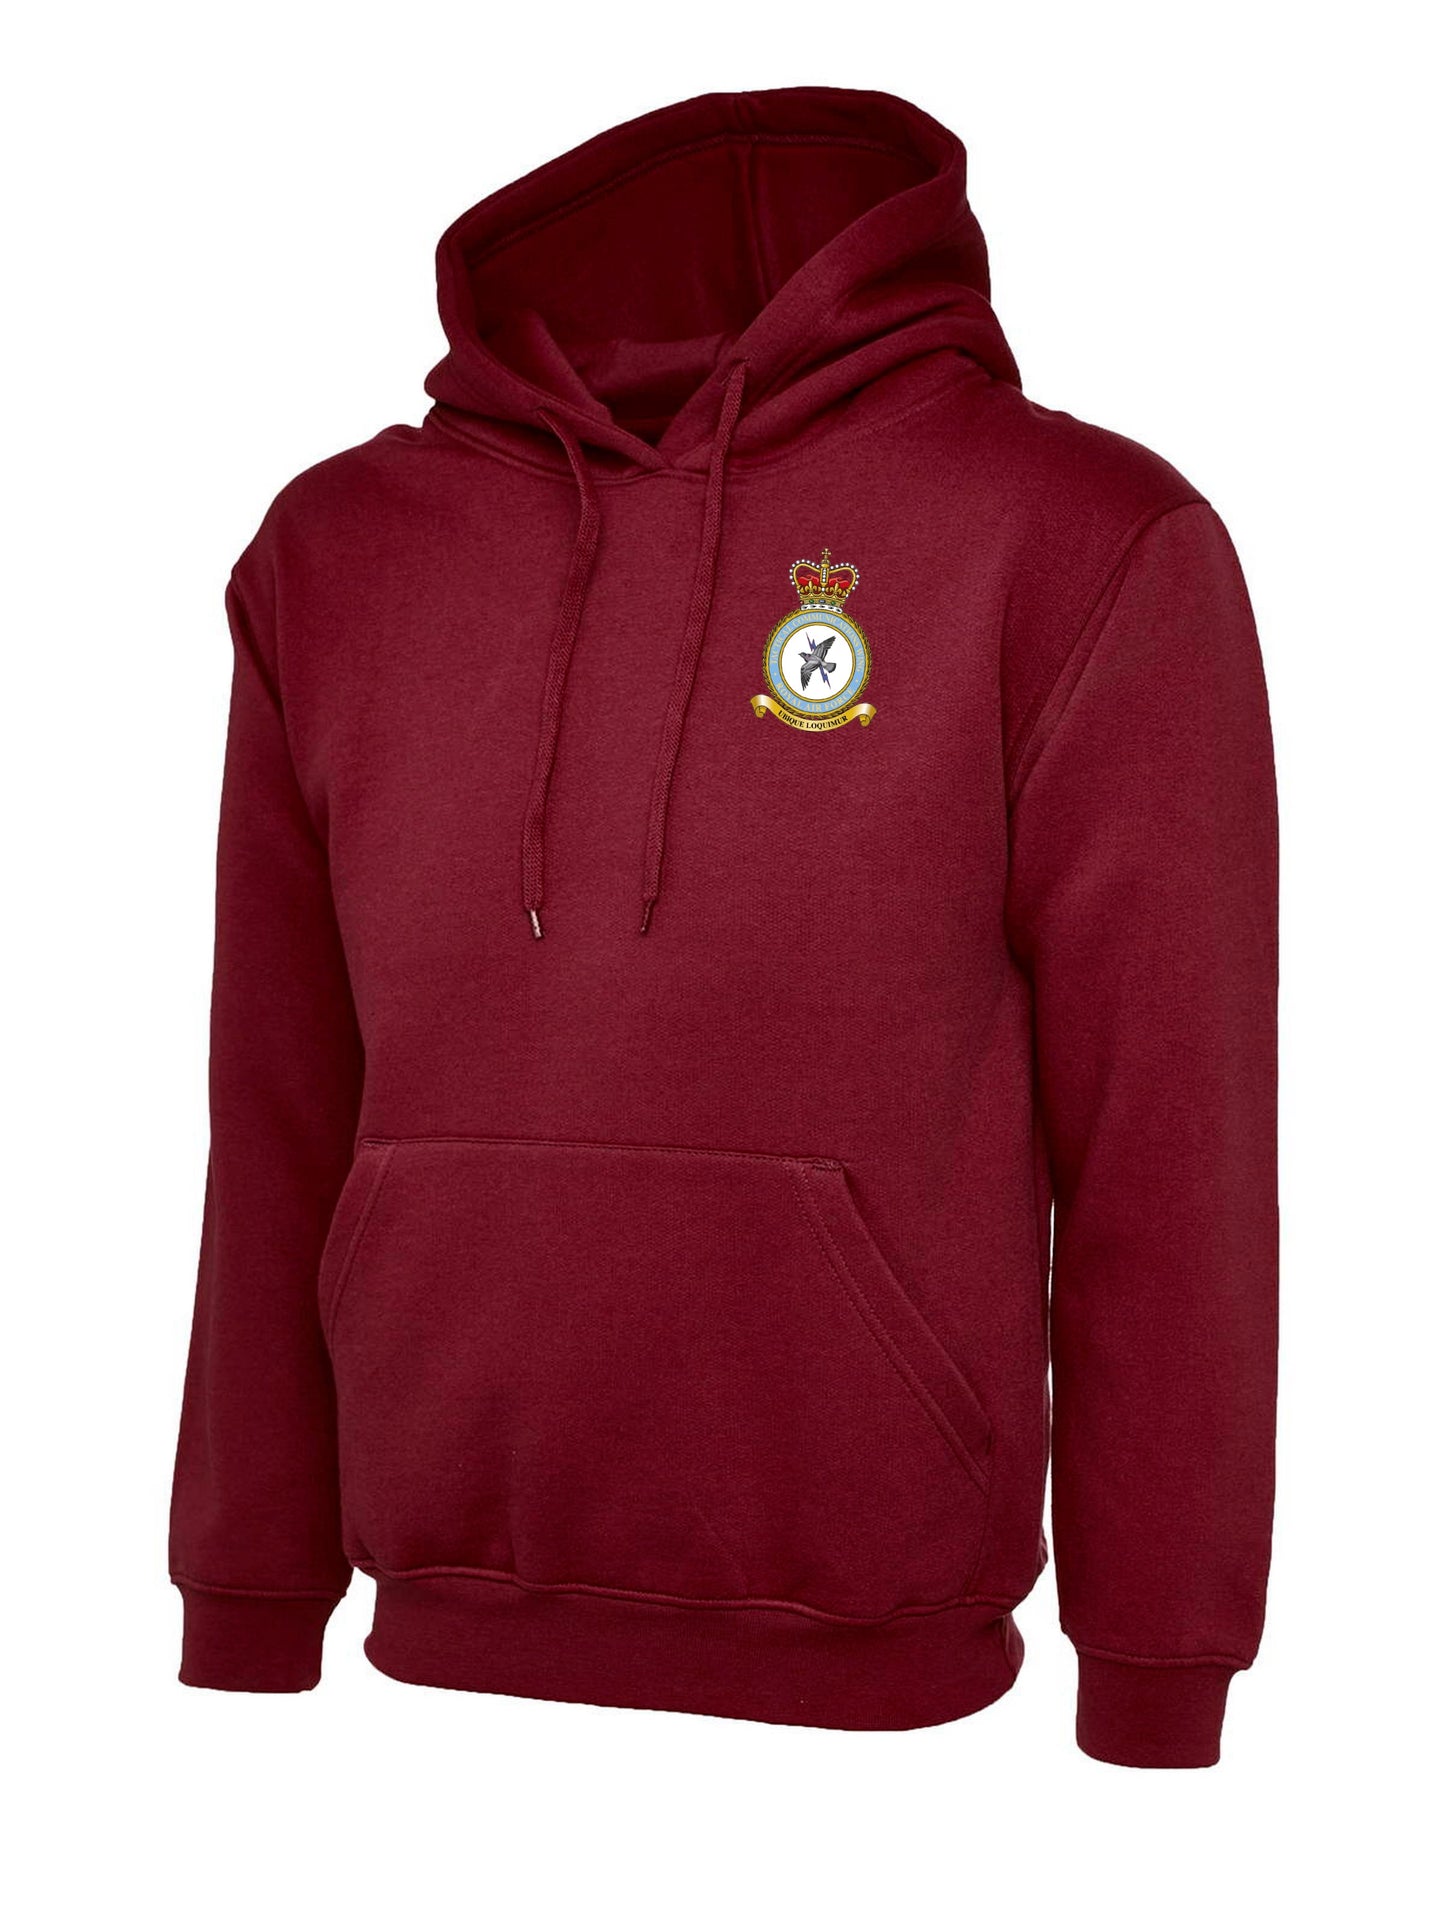 TCW CREST EMBROIDERED HOODIE - The Forces Shop